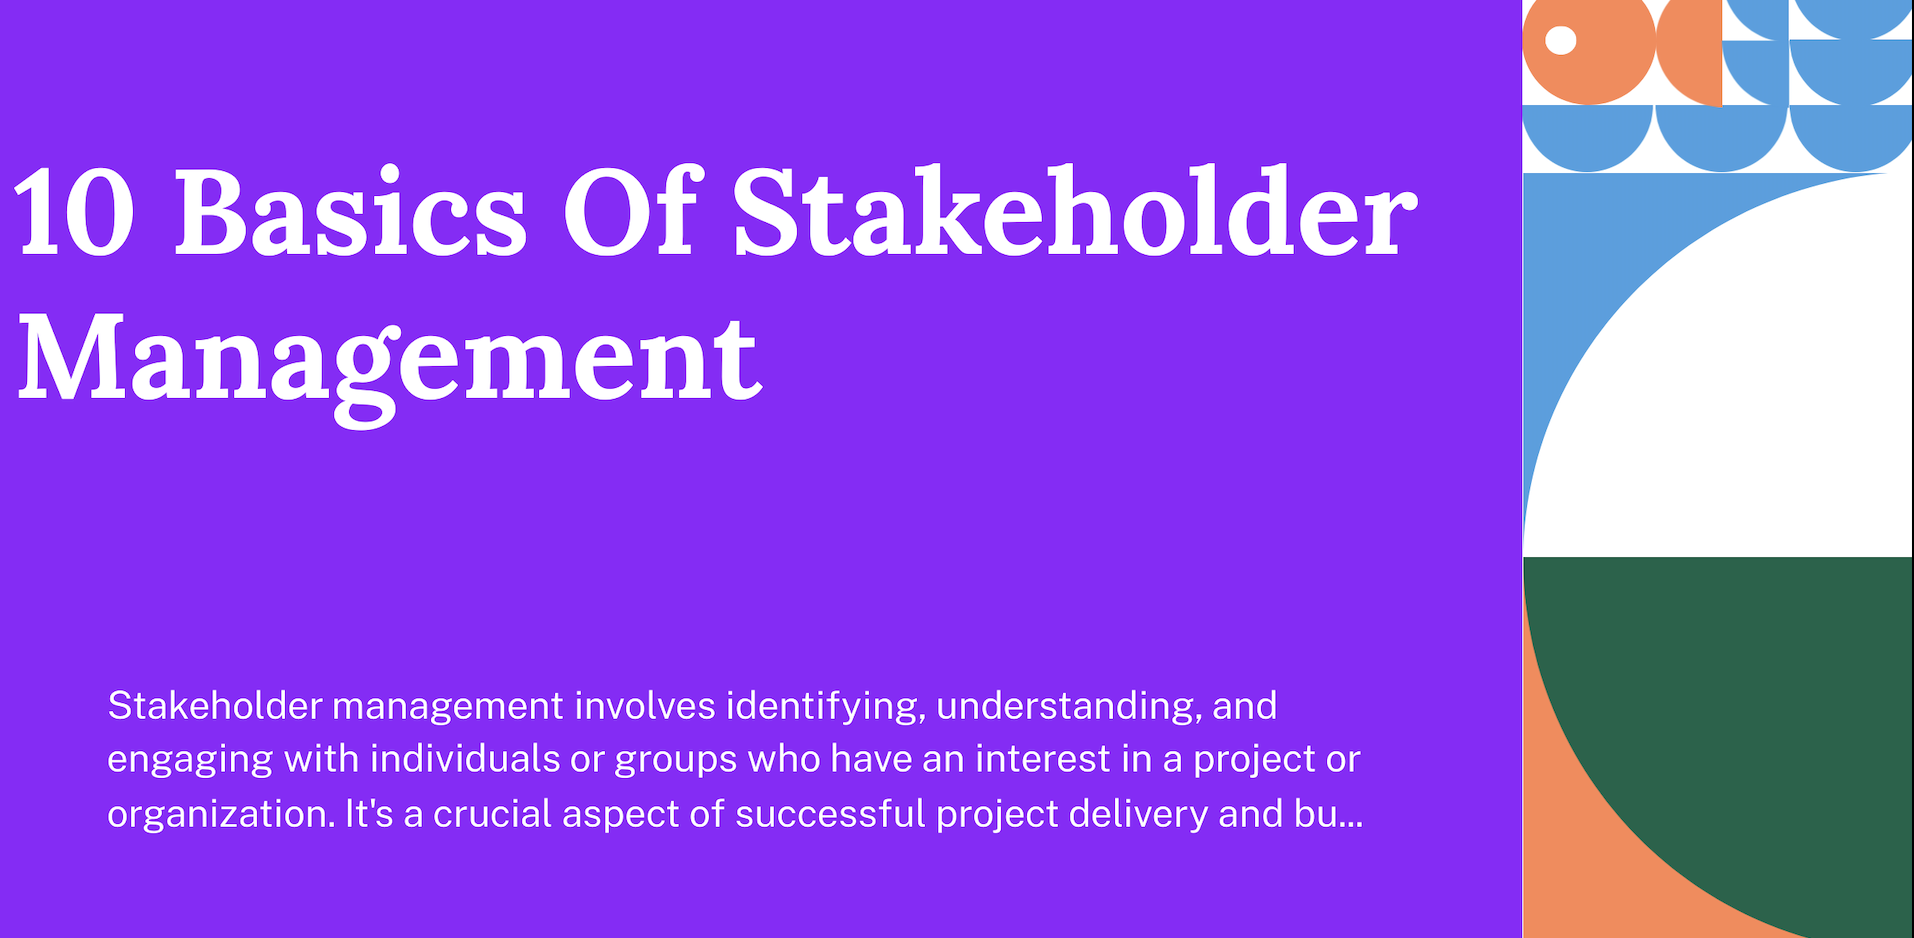 10 Basics Of Stakeholder Management- Feature